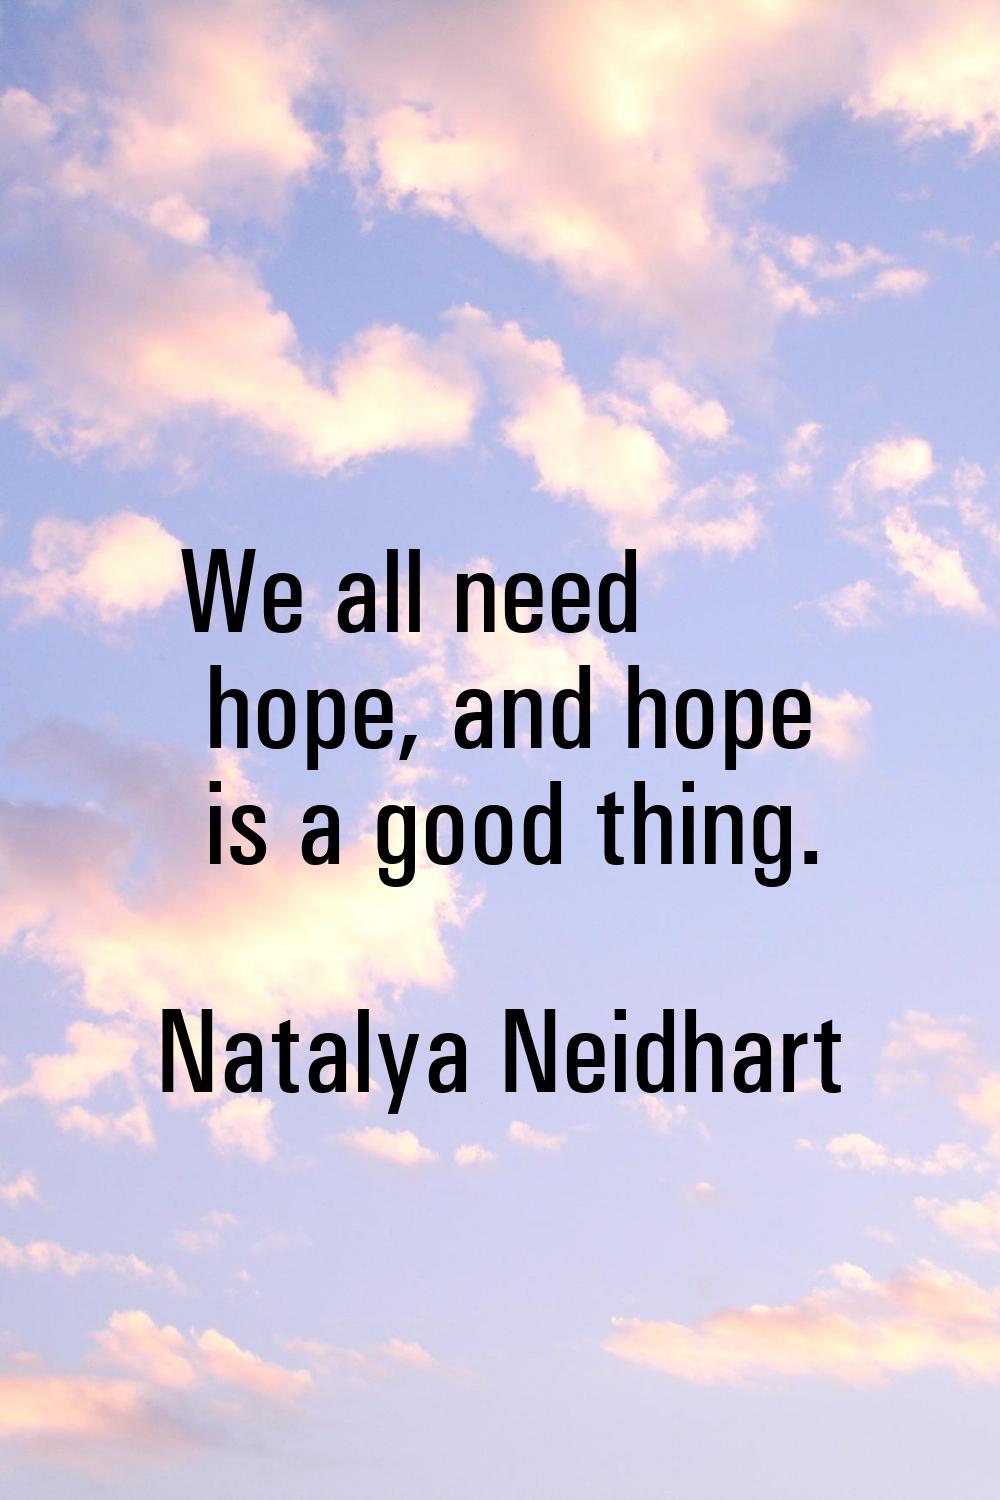 We all need hope, and hope is a good thing.